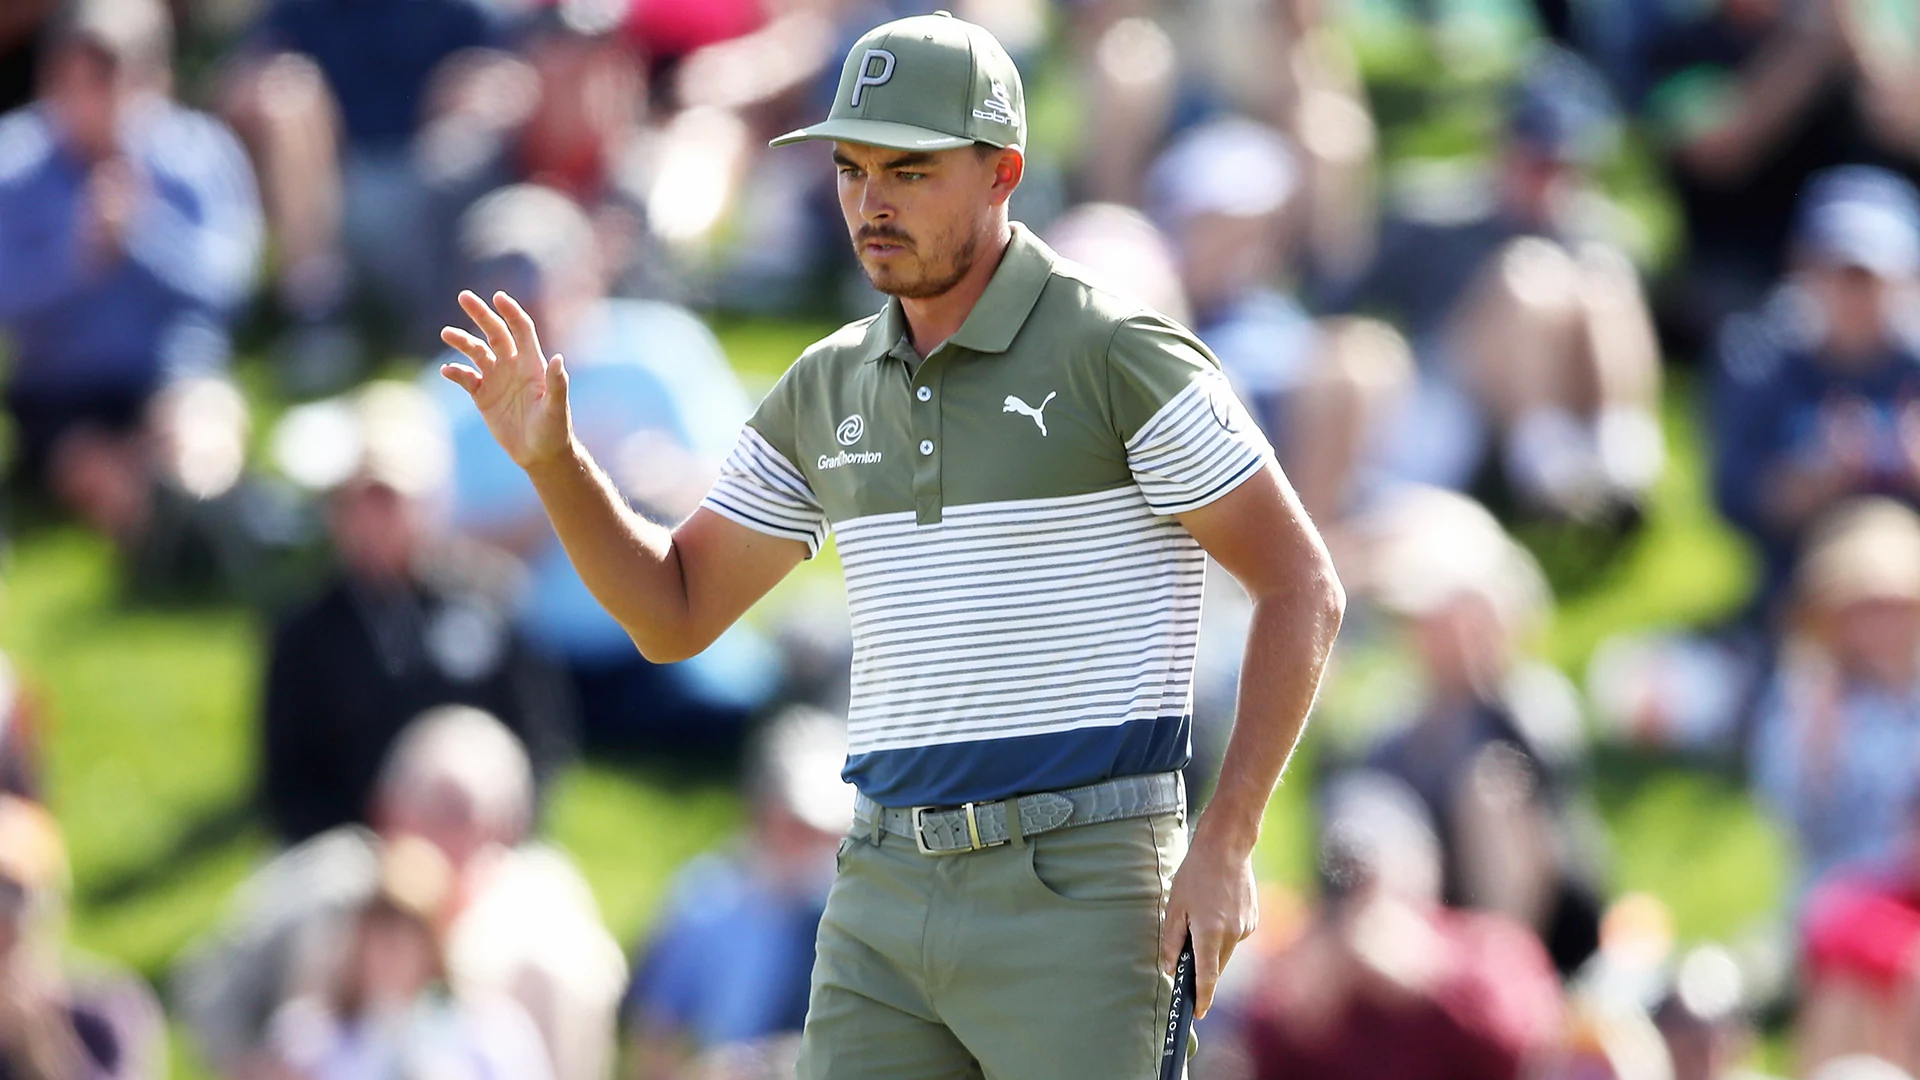 Rickie Fowler to wear mic at Charles Schwab Challenge, but Justin Thomas not a fan